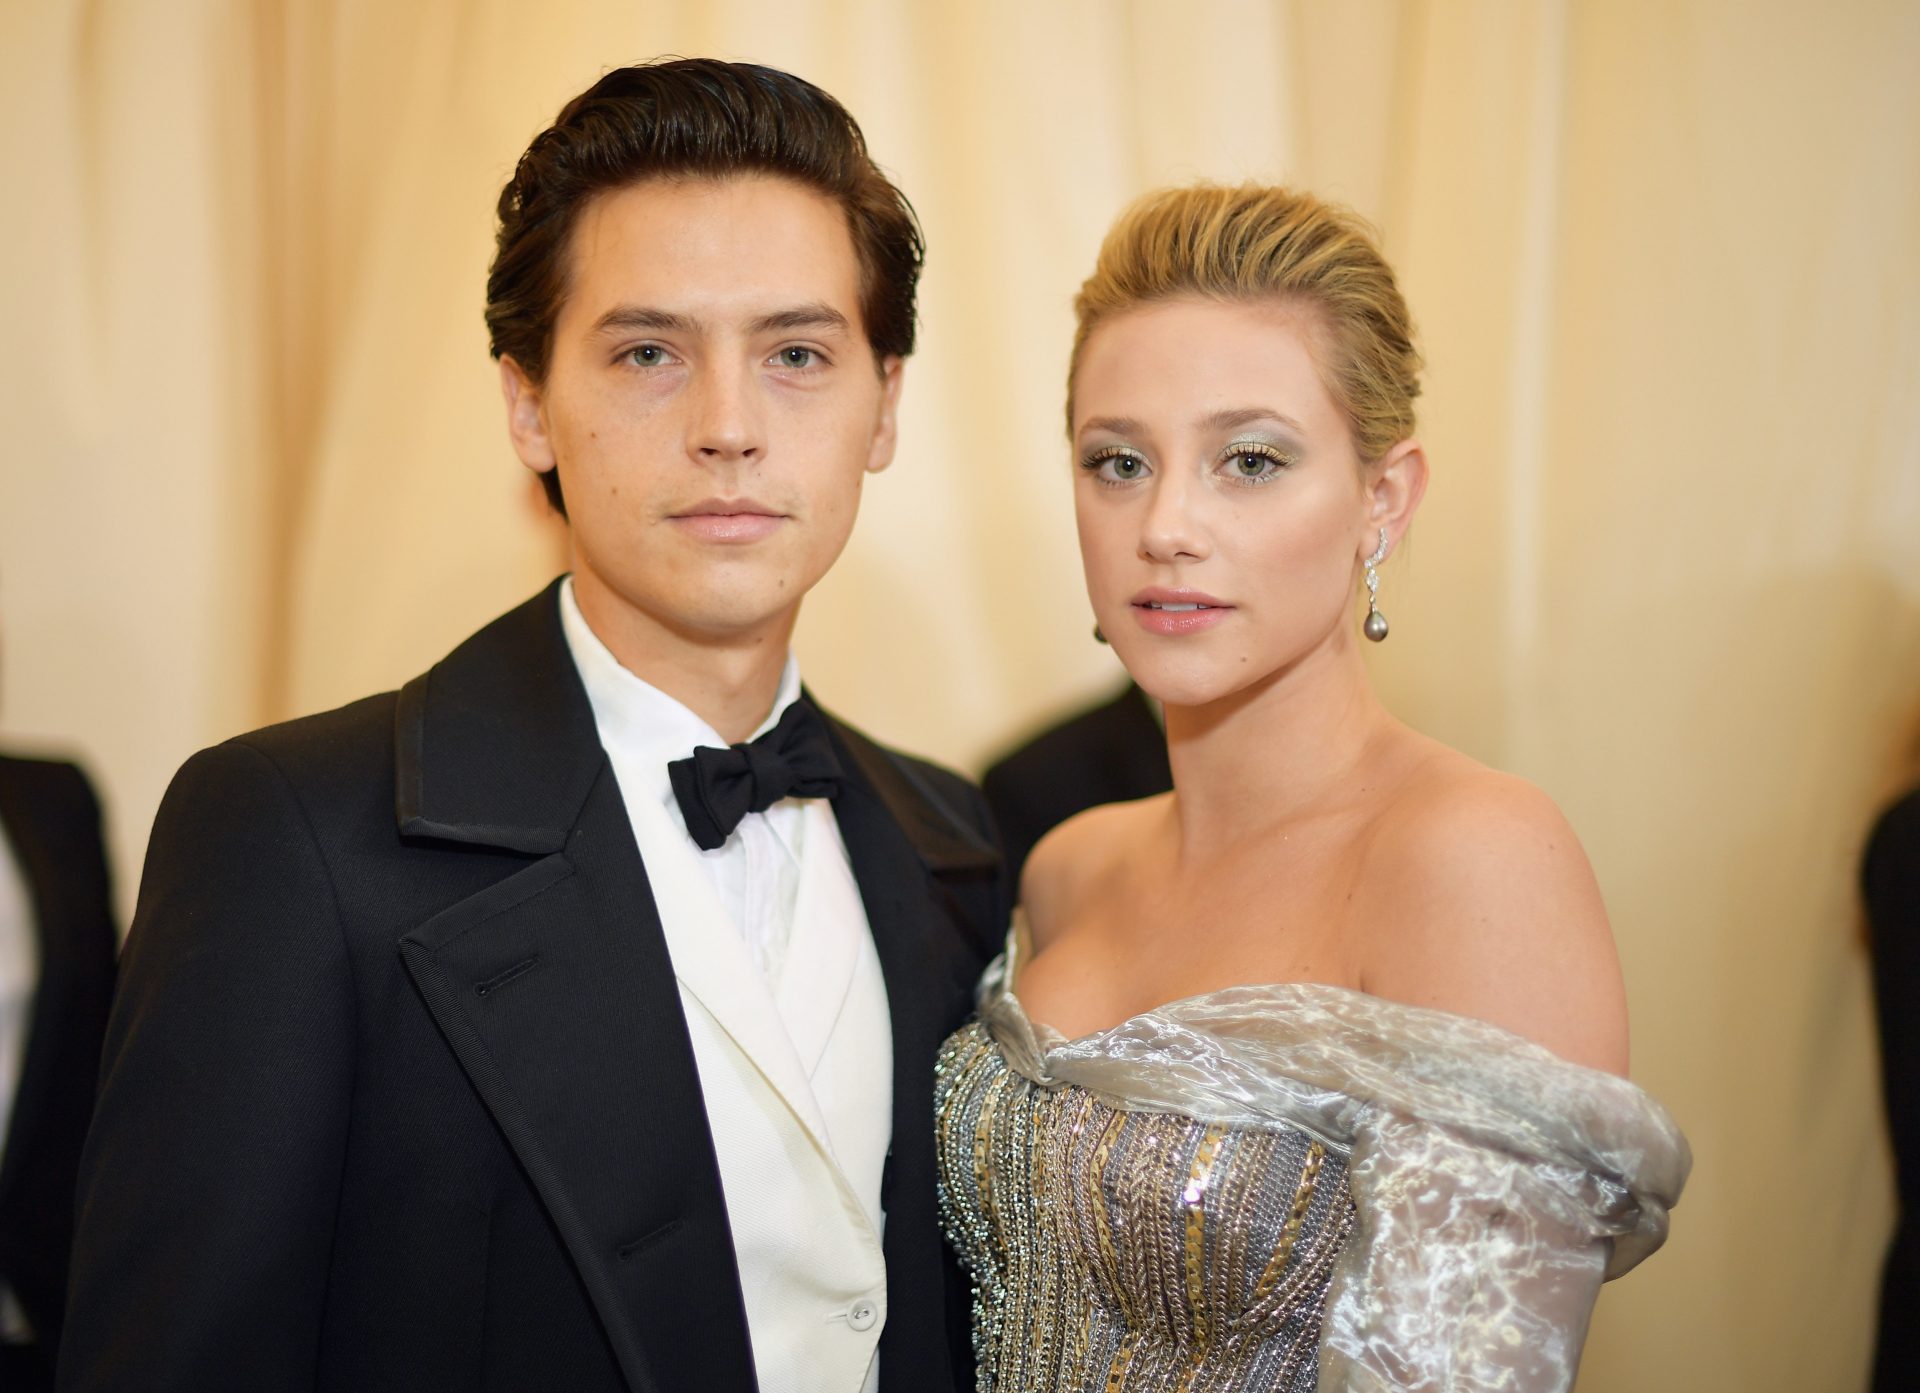 Lili Reinhart Reputedly Confirms Her Breakup With Cole Sprouse in New Interview